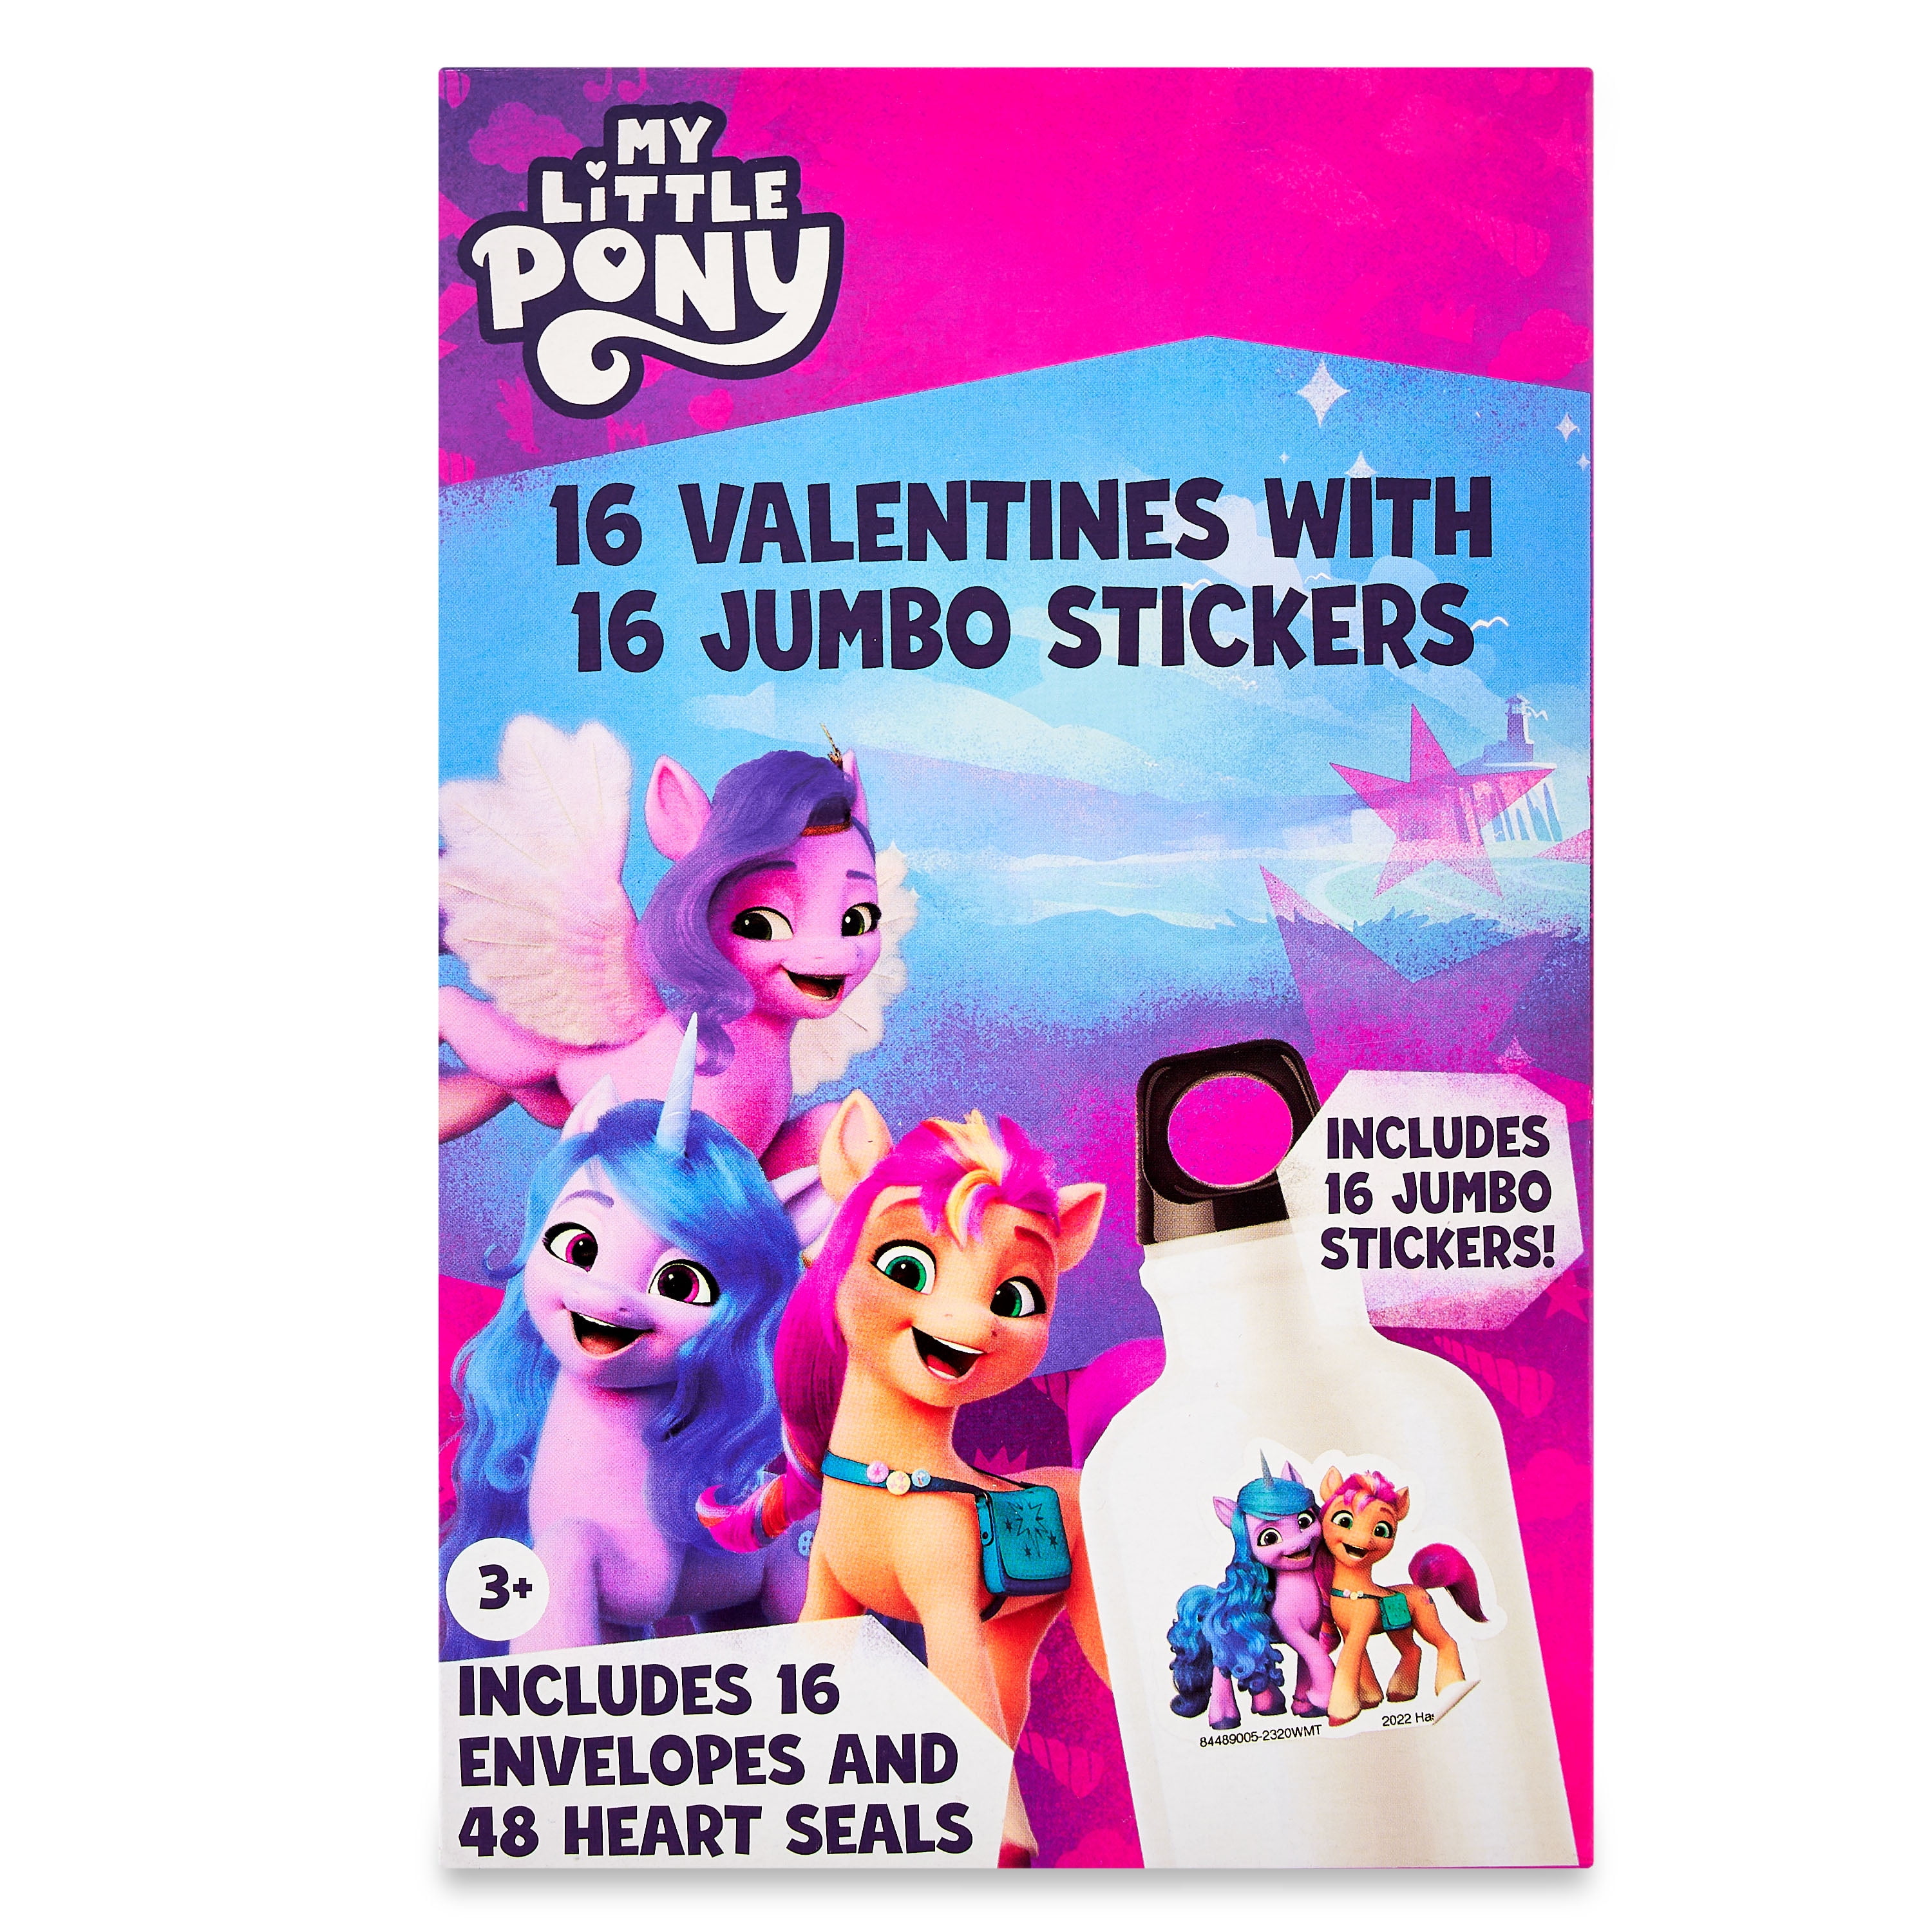 Way To Celebrate My Little Pony Valentine's Day Cards, Classroom Exchange, Paper, 16 Count, Kiddie Cards, Multi-Colored